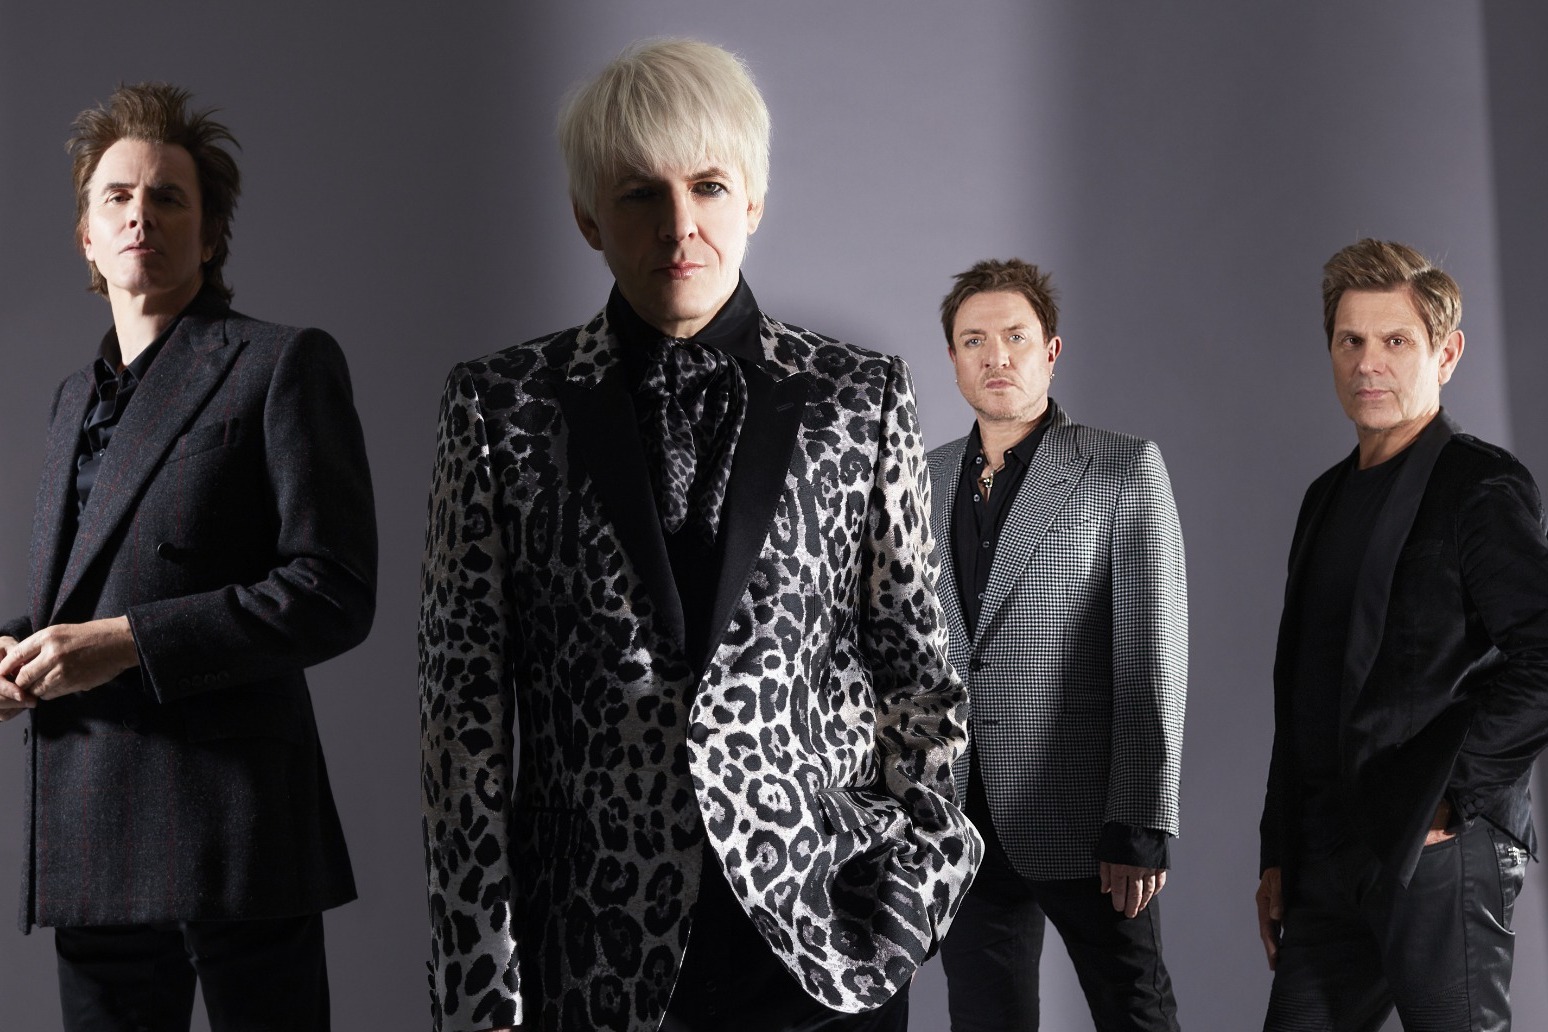 Duran Duran frontman hails ‘most valued’ recognition by Rock & Roll Hall of Fame 